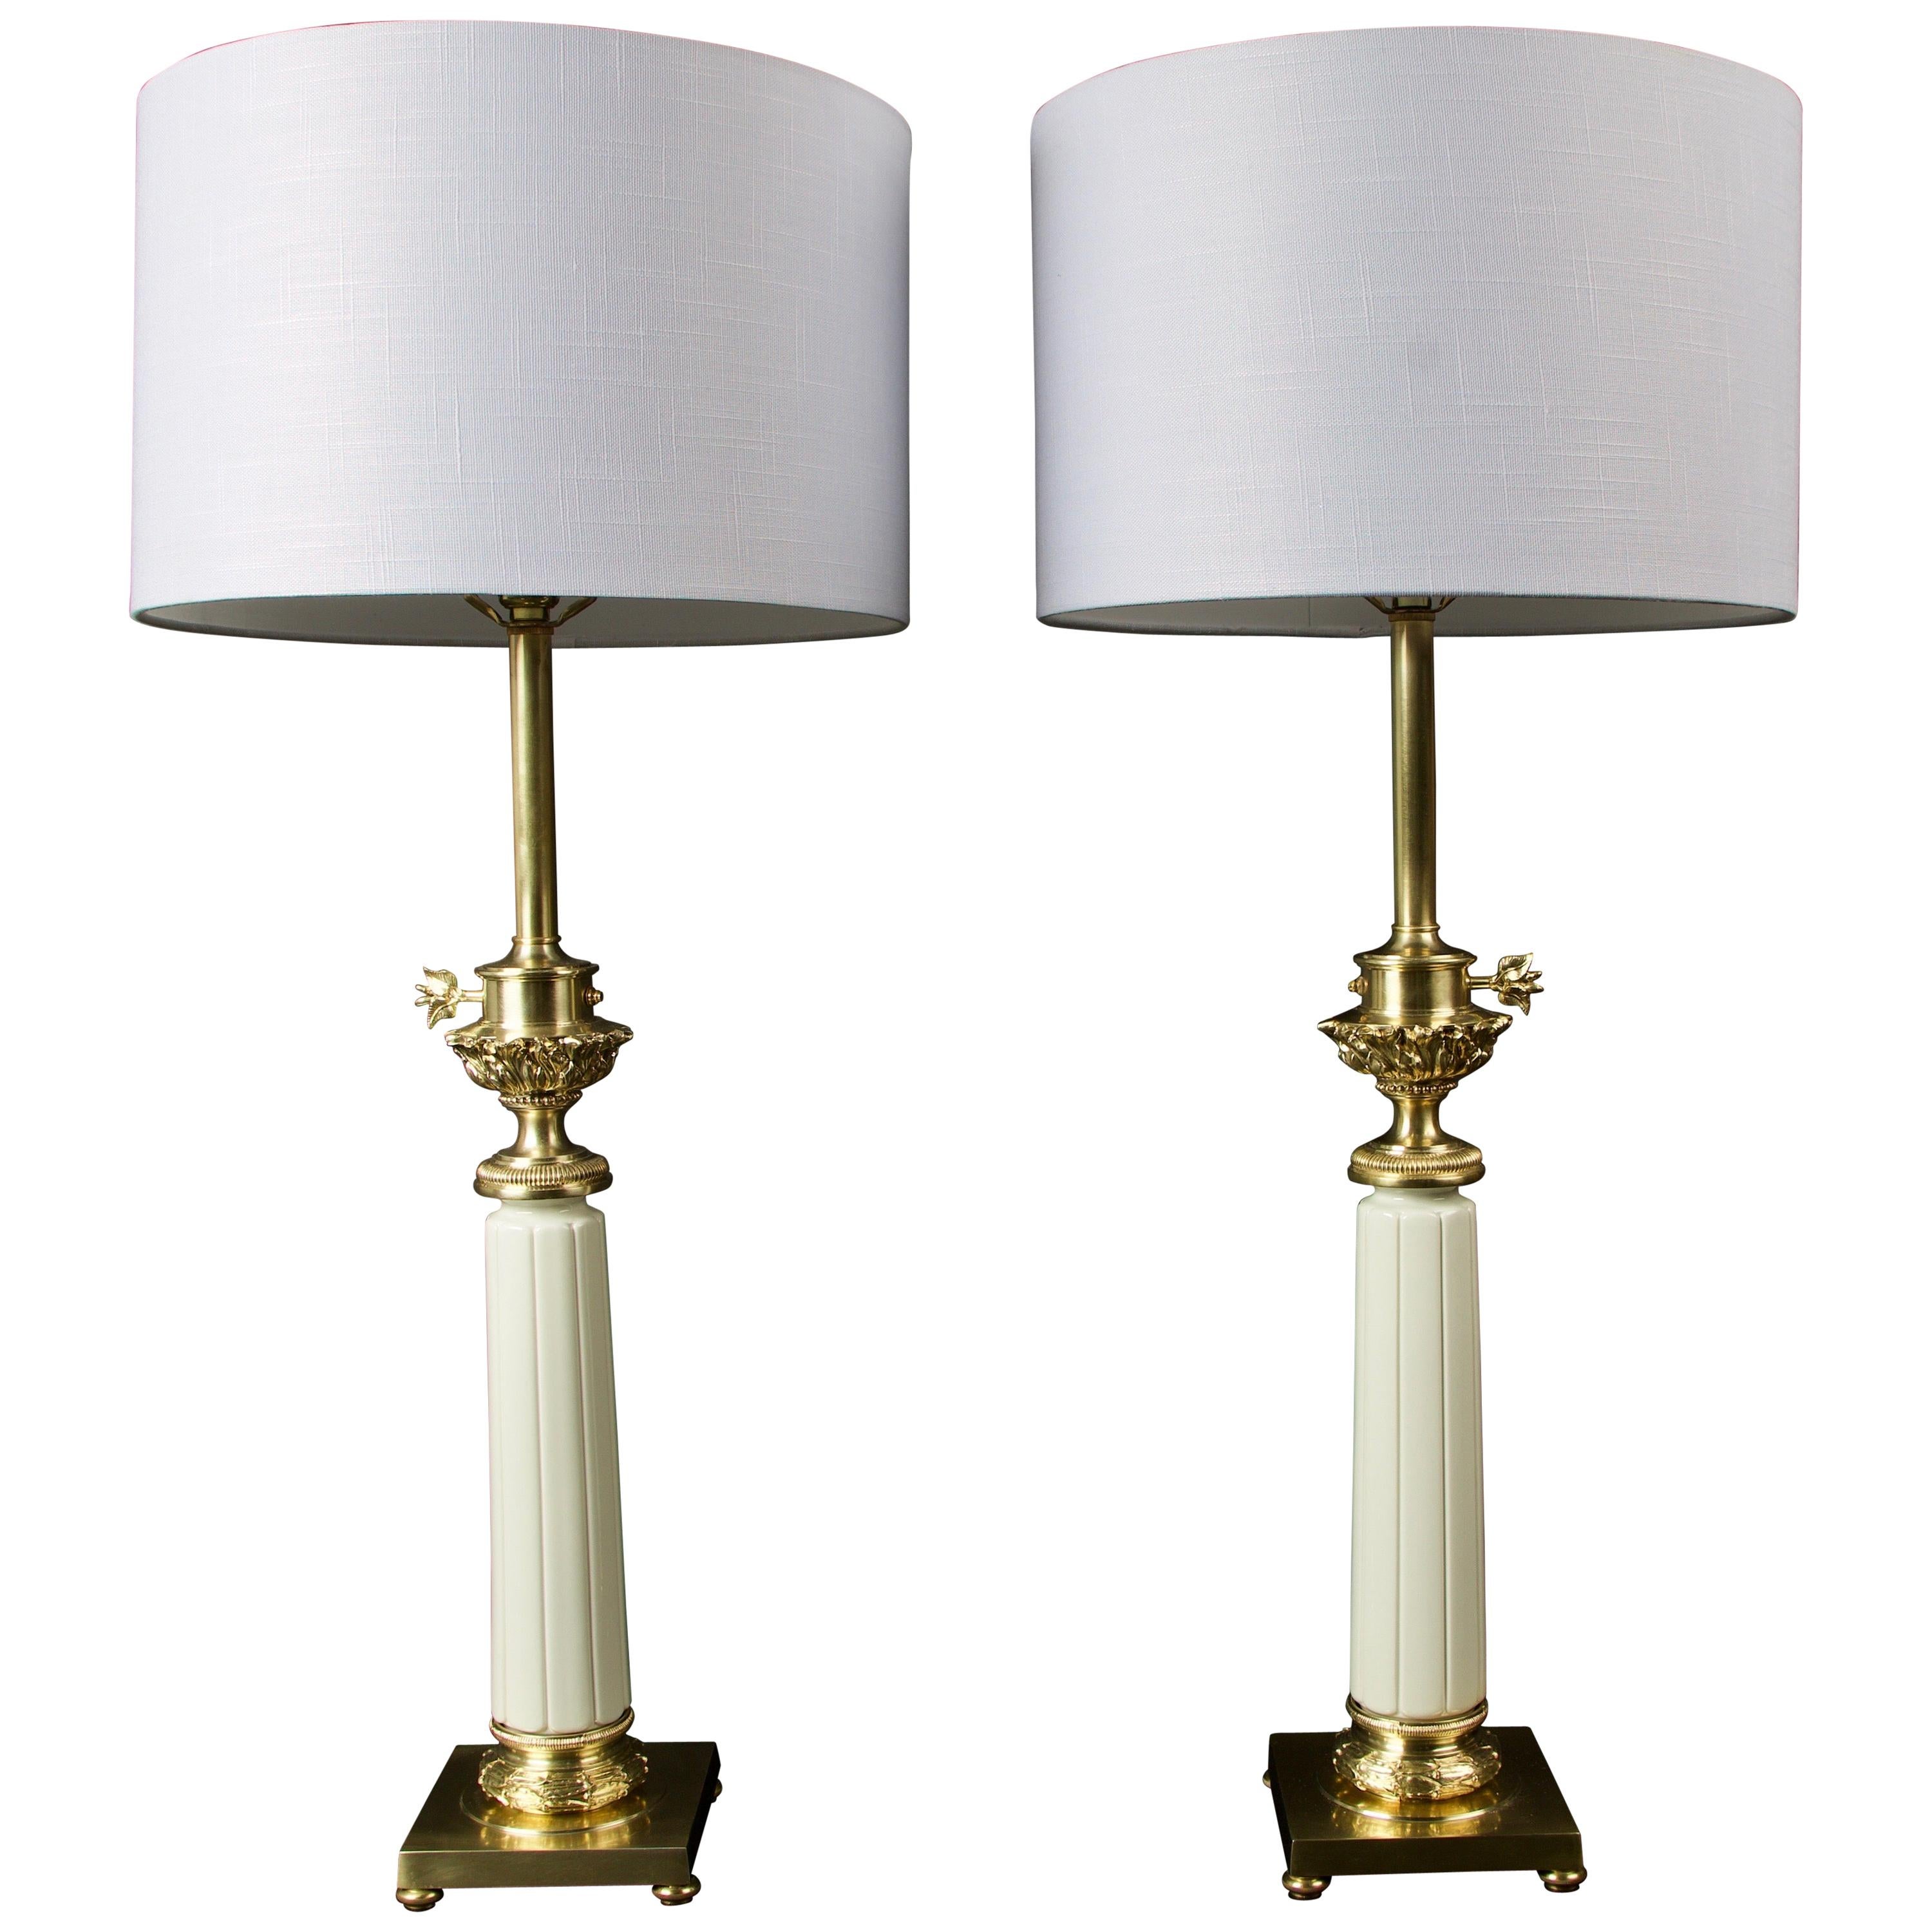 Pair of Hollywood Regency Brass and Ceramic Stiffel Table Lamps